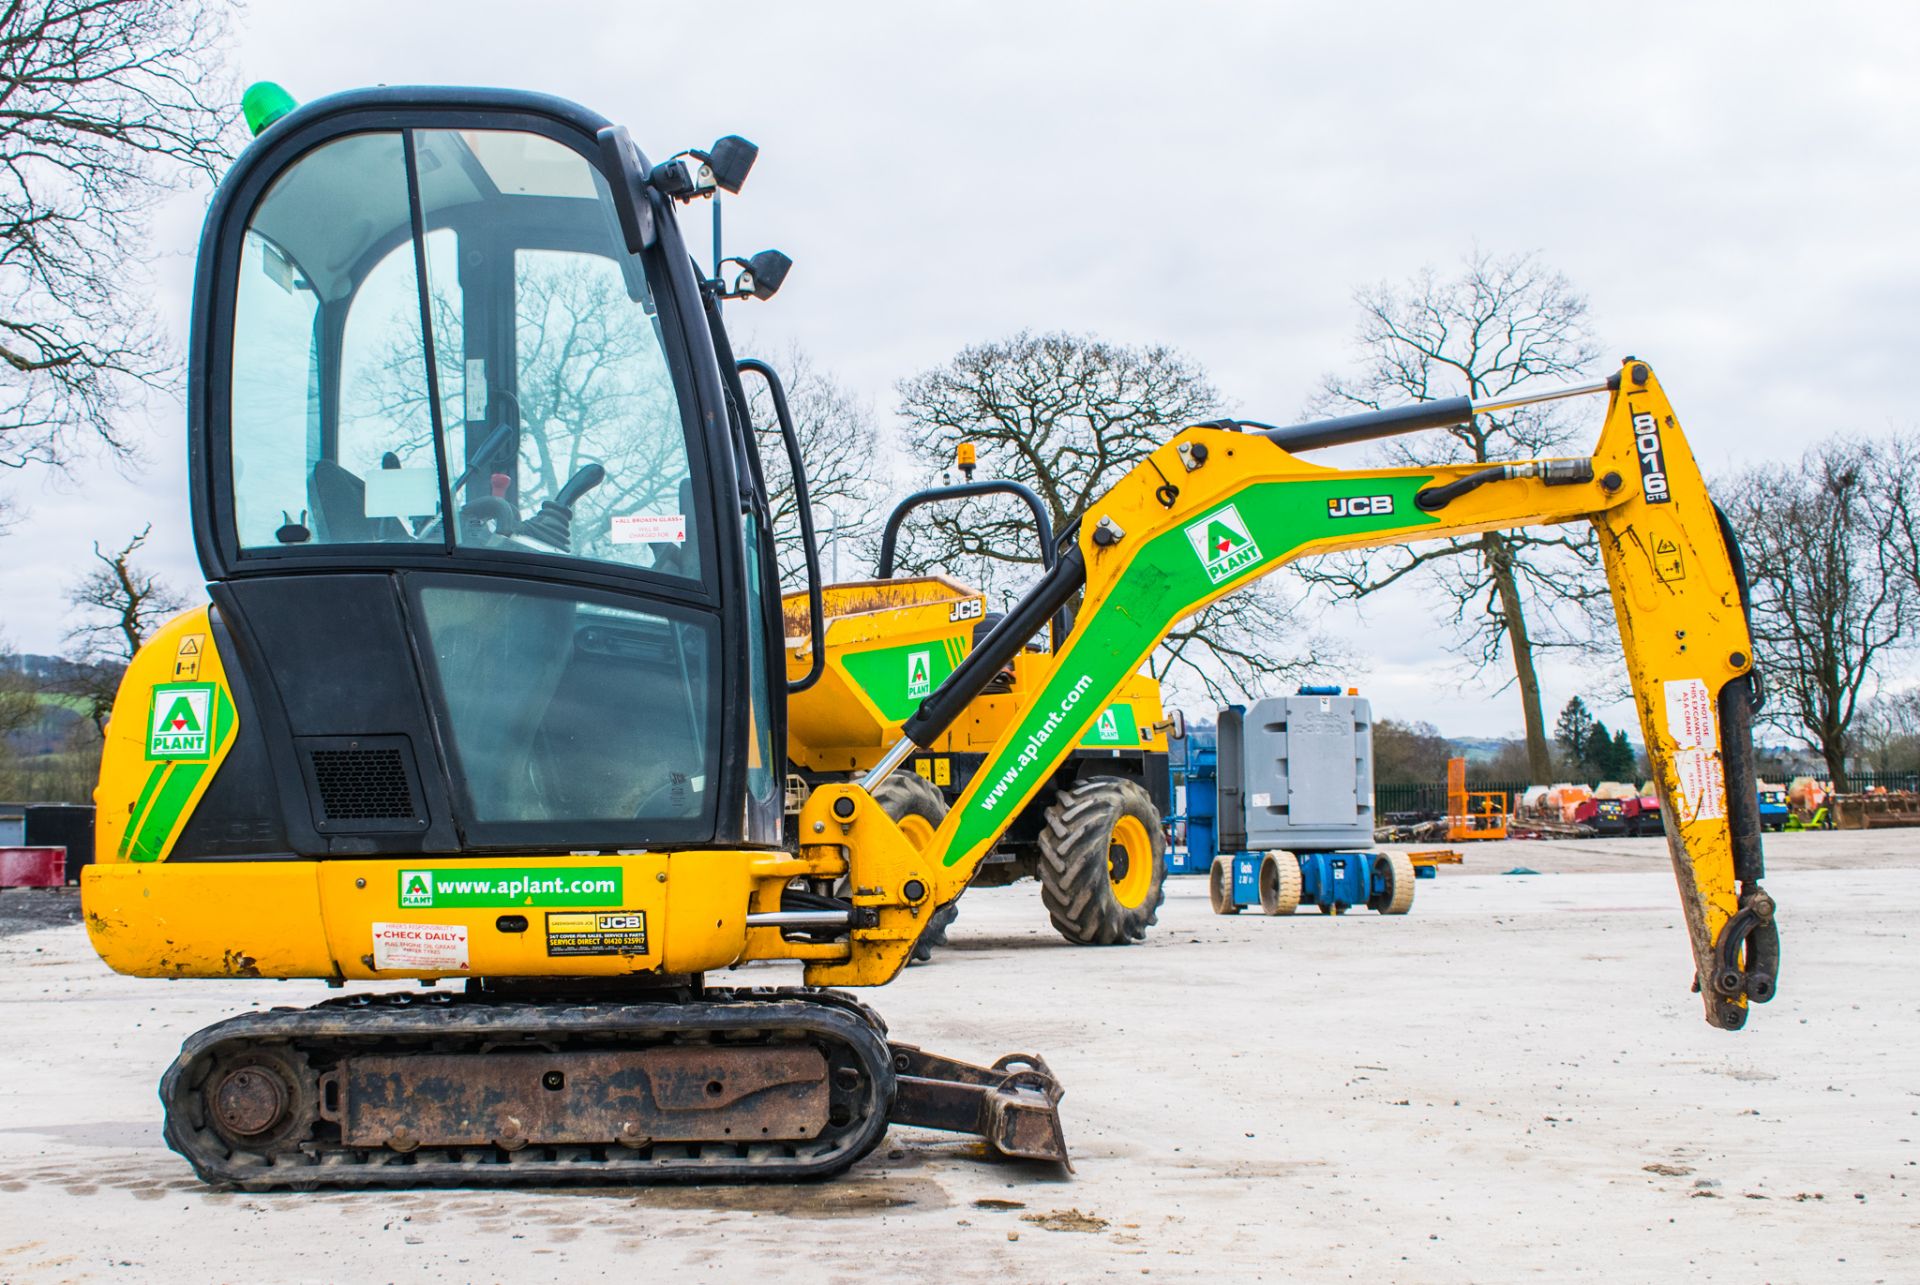 JCB 801.6 1.5 tonne rubber tracked mini excavator Year: 2015 S/N: 2071769 Recorded Hours: 1518 - Image 7 of 17